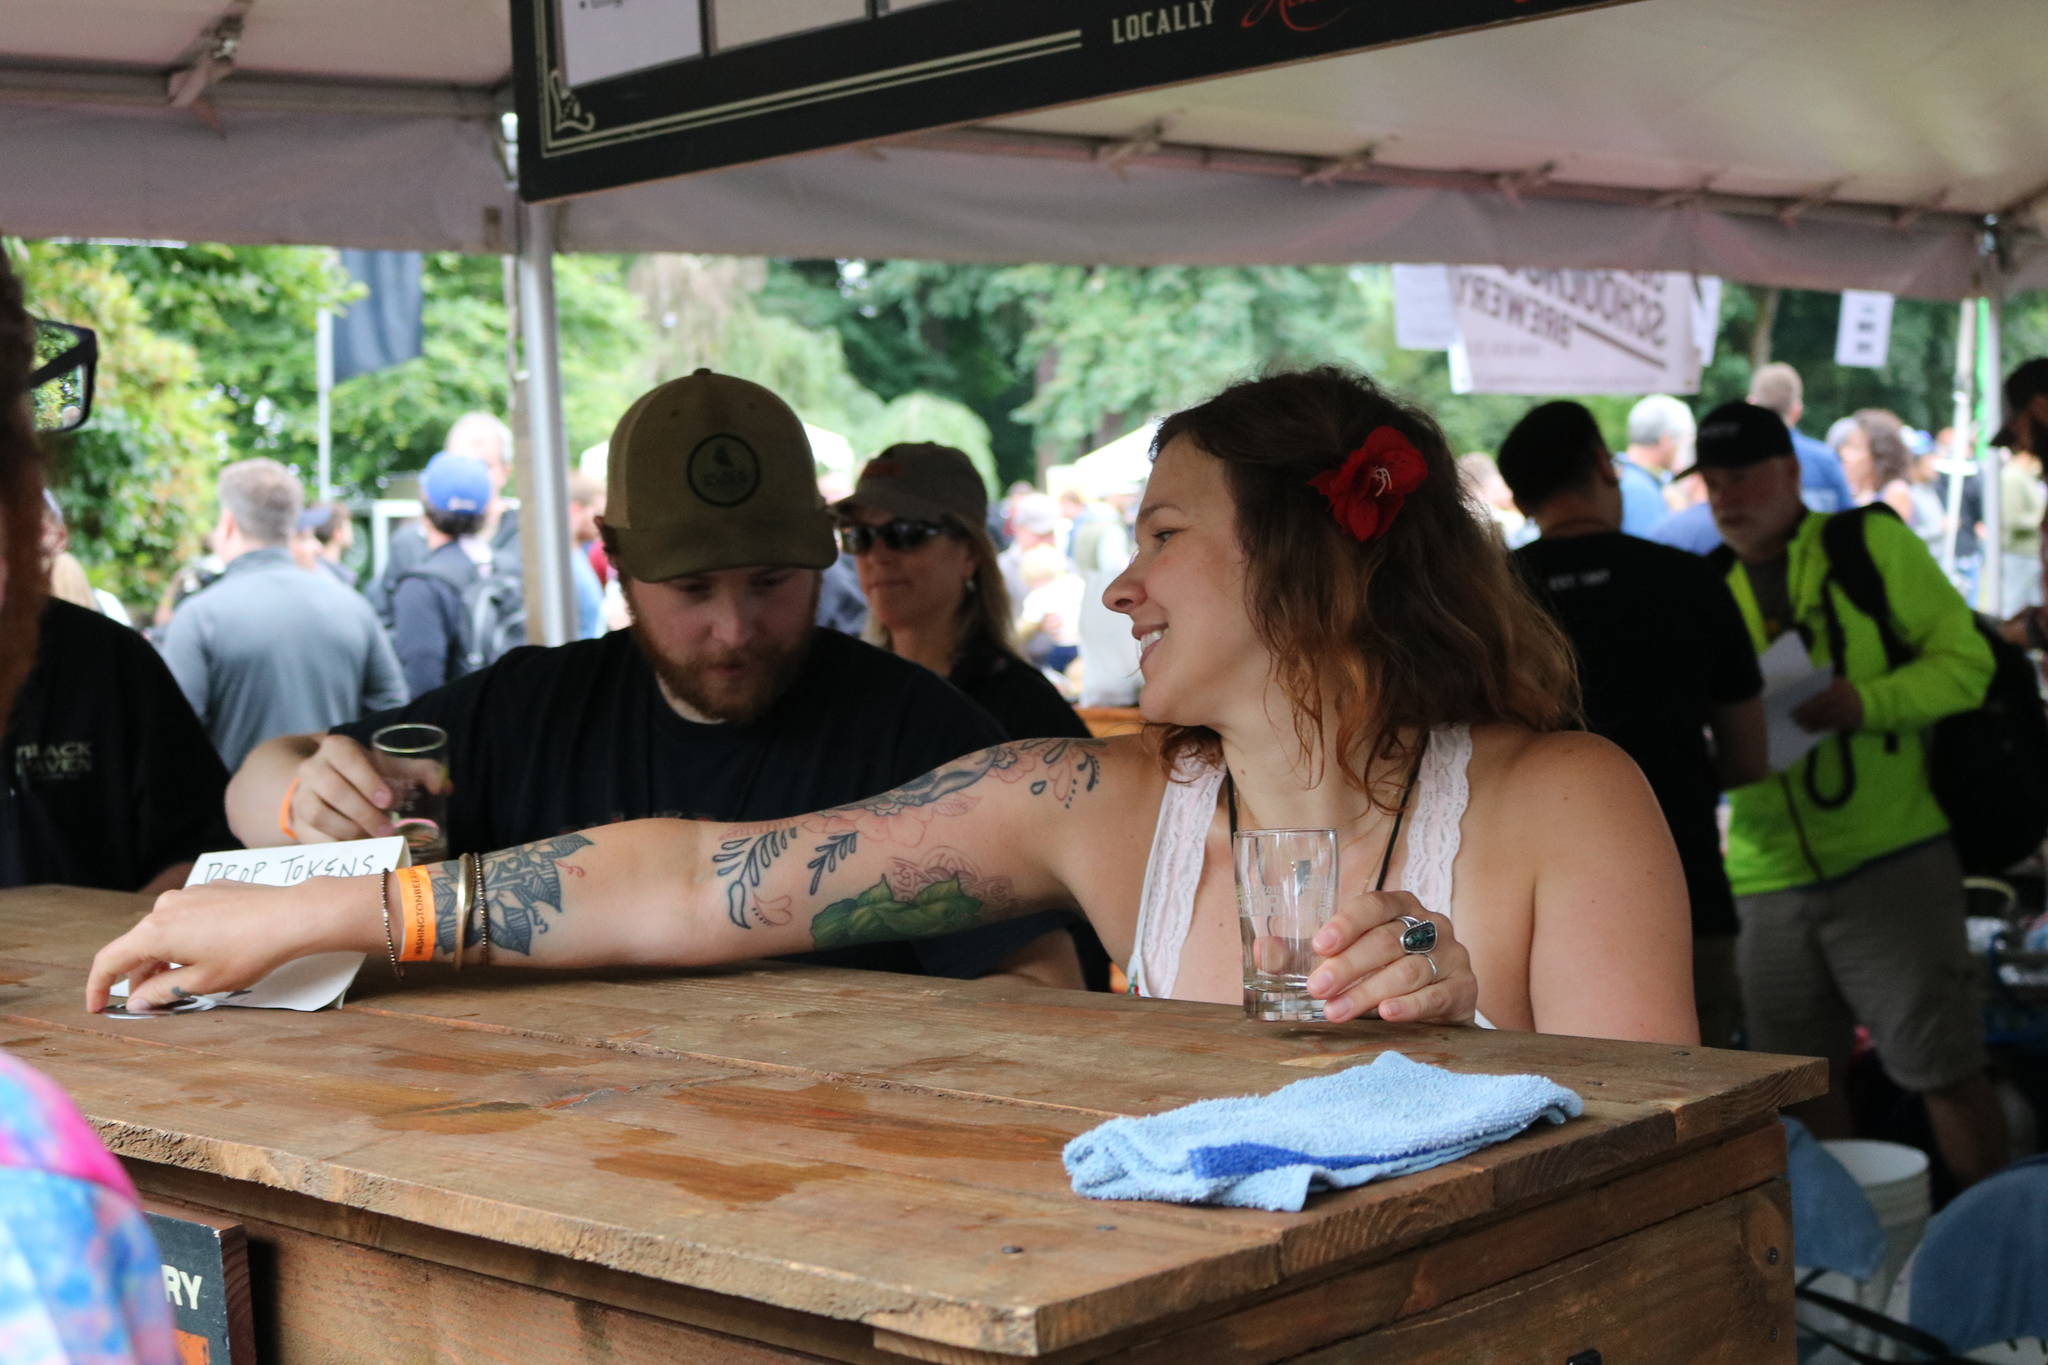 Karen Troy, taproom manager for Black Raven Brewing in Redmond, staffs the kiosk during last weekend’s Washington Brewers Festival at Marymoor Park. Aaron Kunkler, Reporter Newspapers